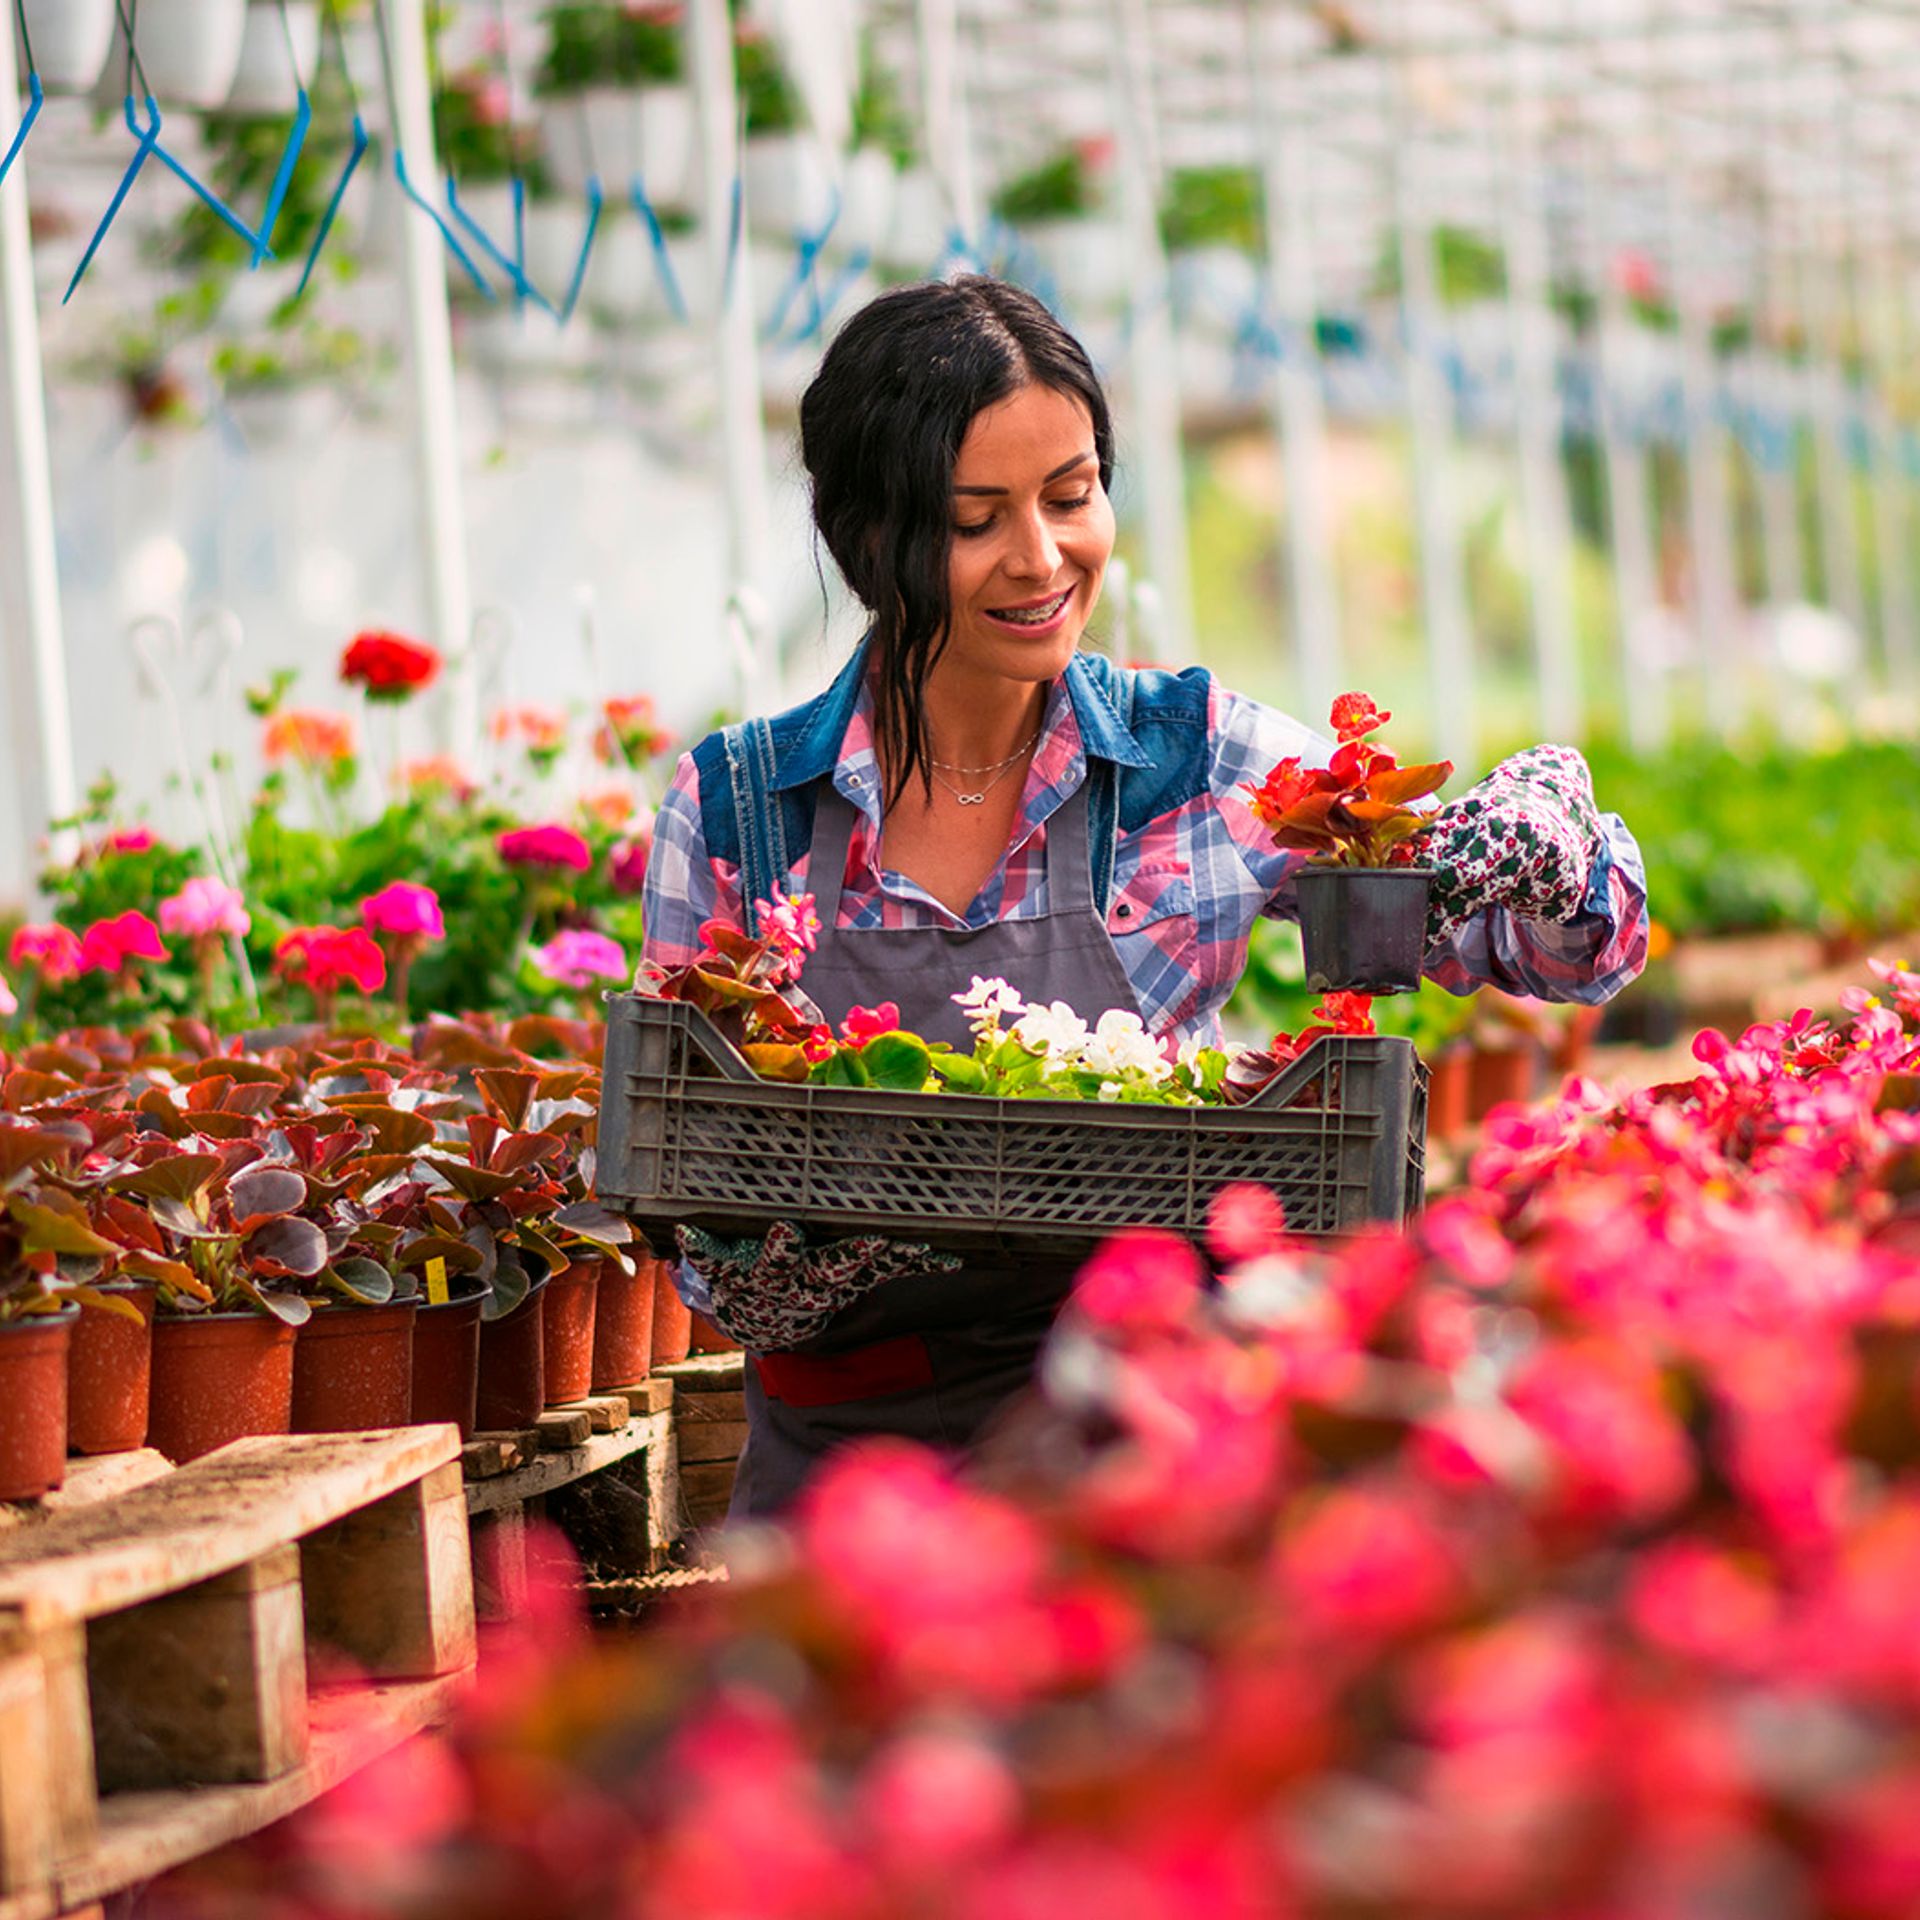 Image of a floriculture producer watering plants in a greenhouse